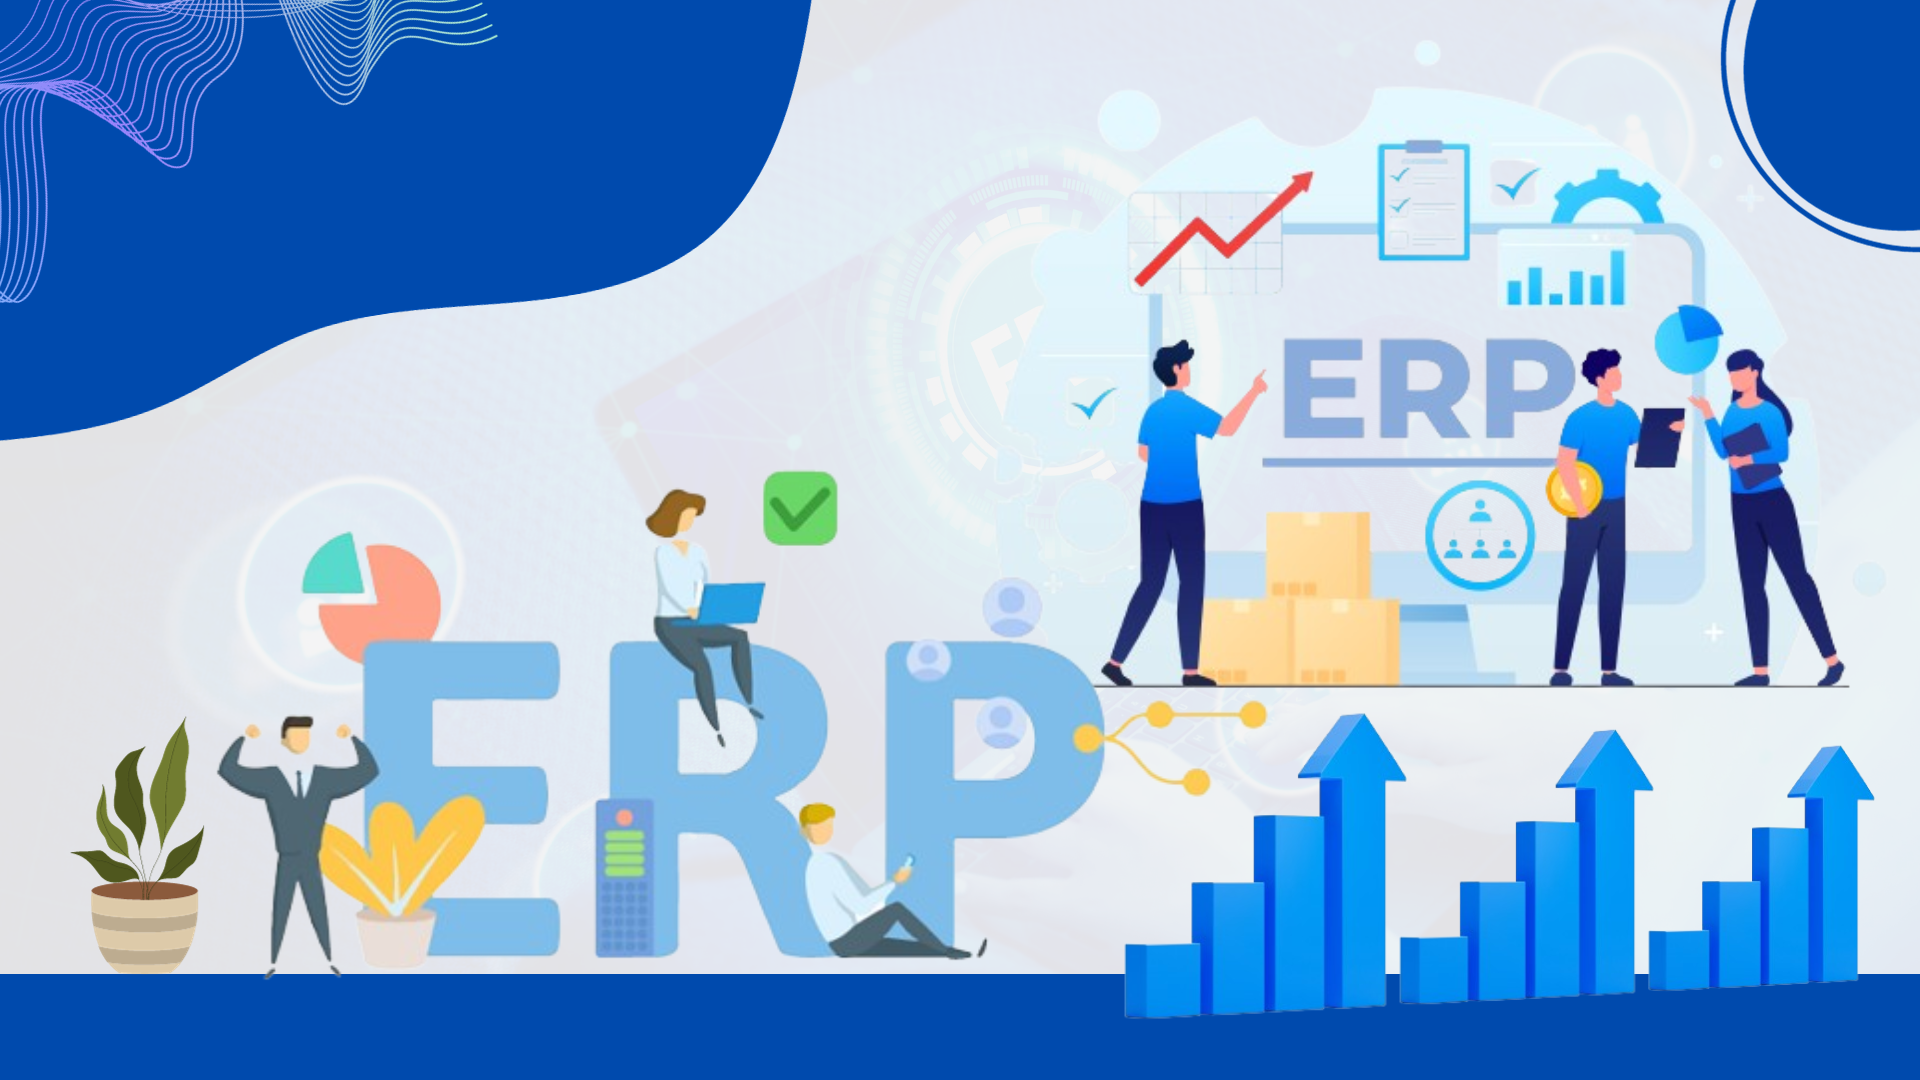 How Important is an ERP in Digital Transformation?